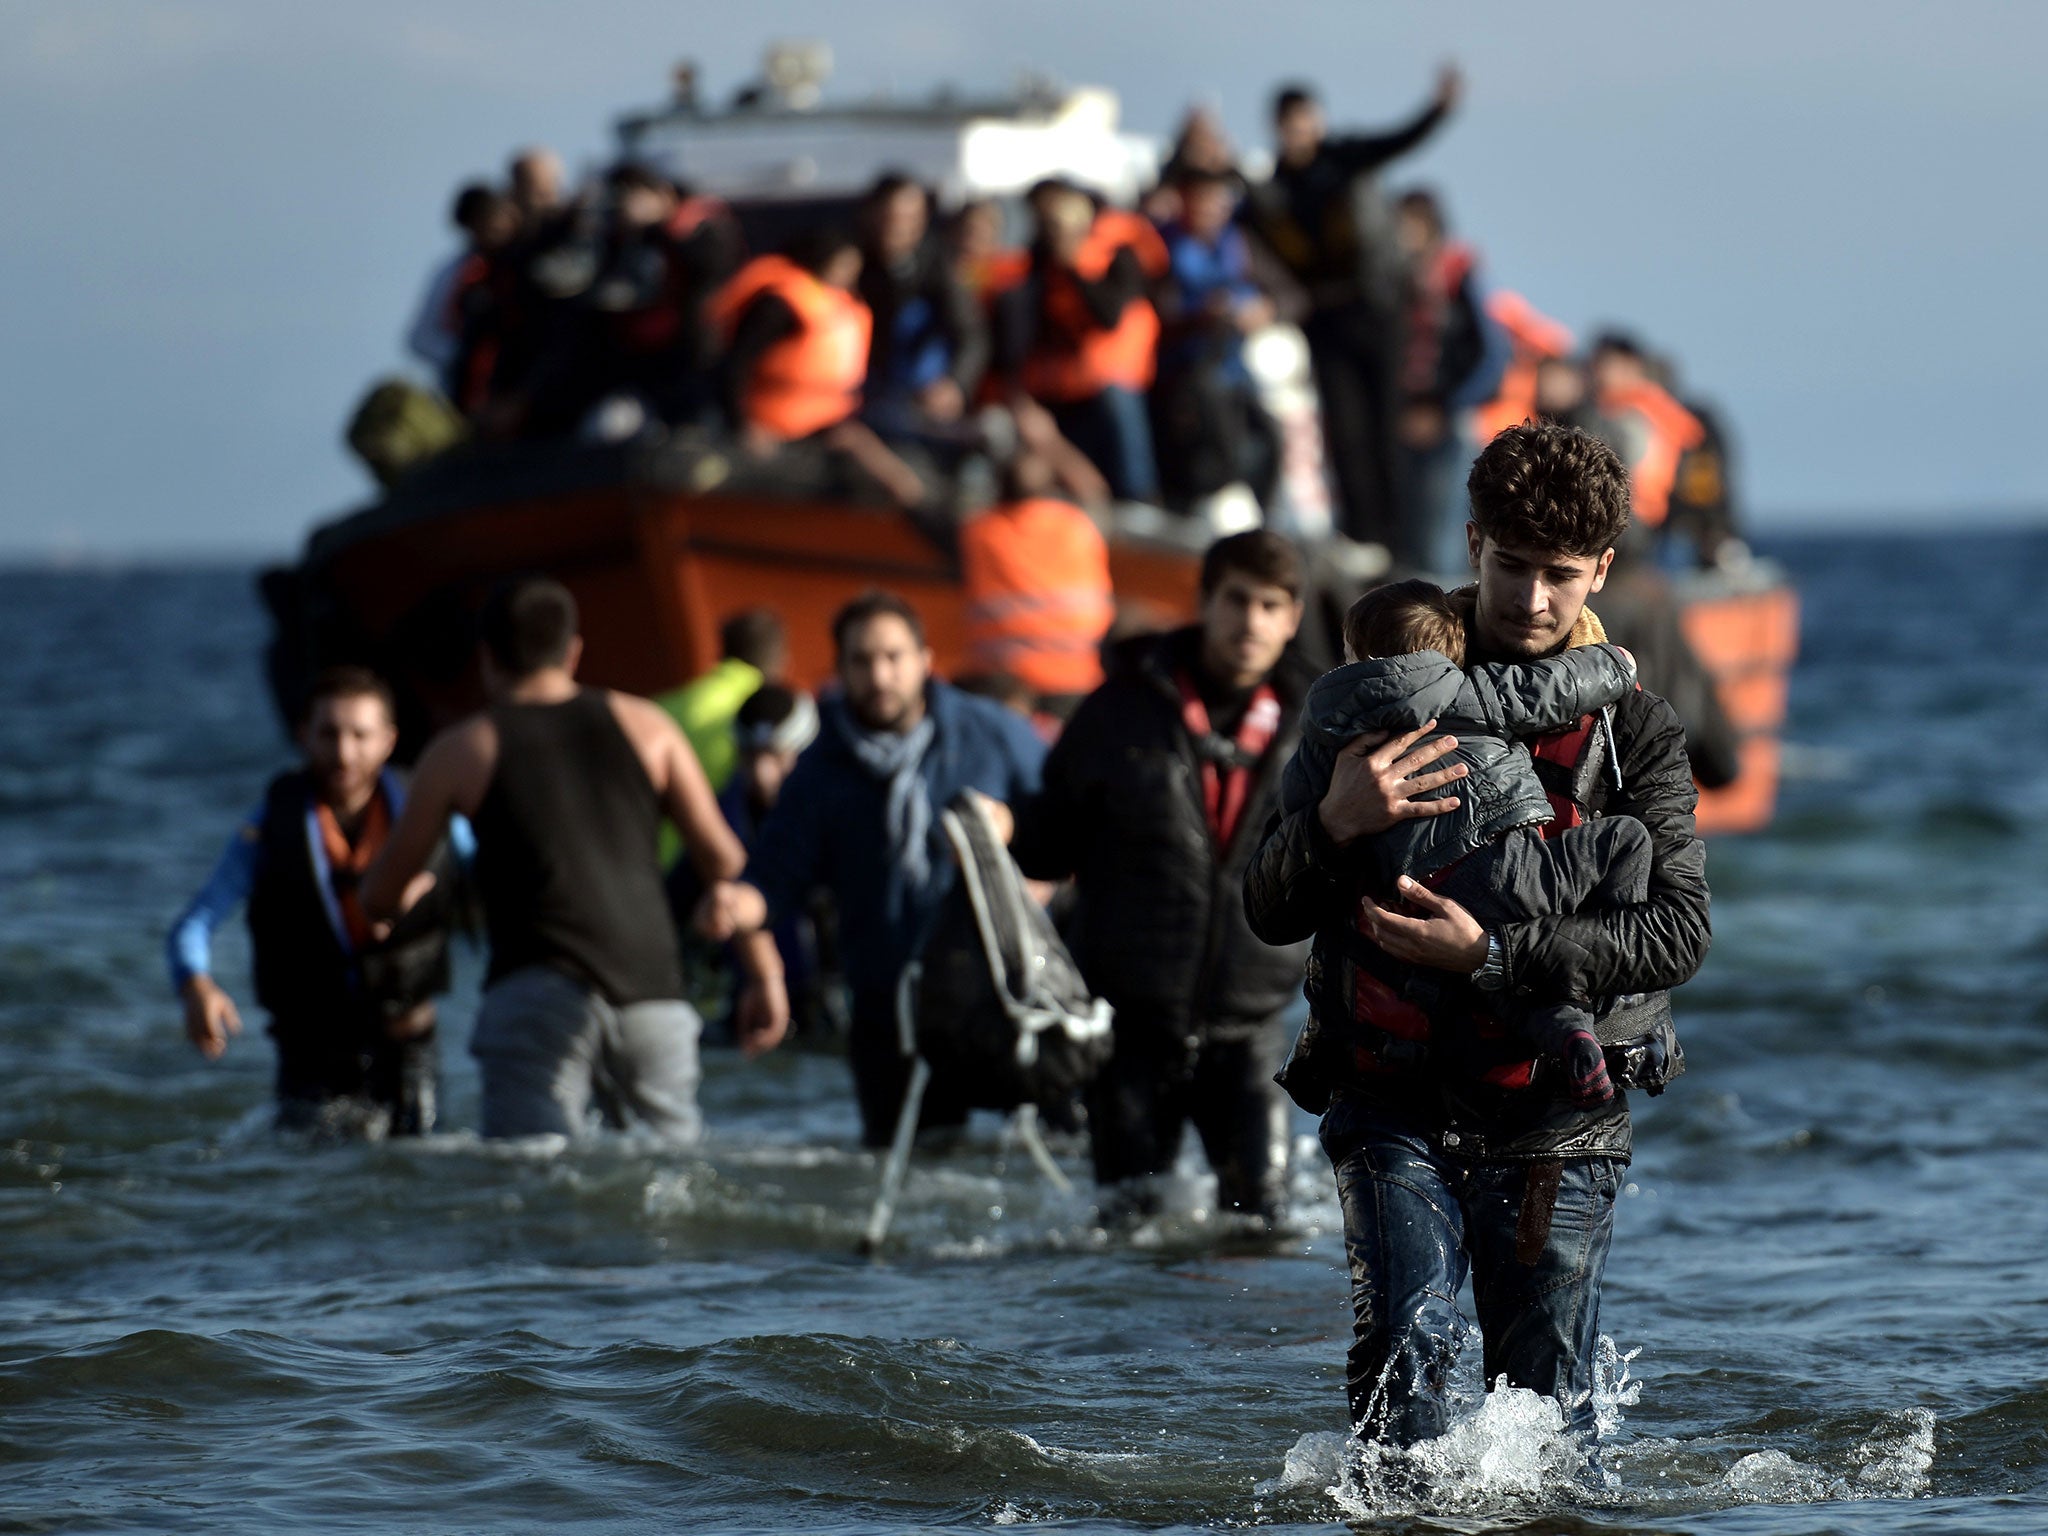 The flow of refugees heading to Europe has continued into 2016